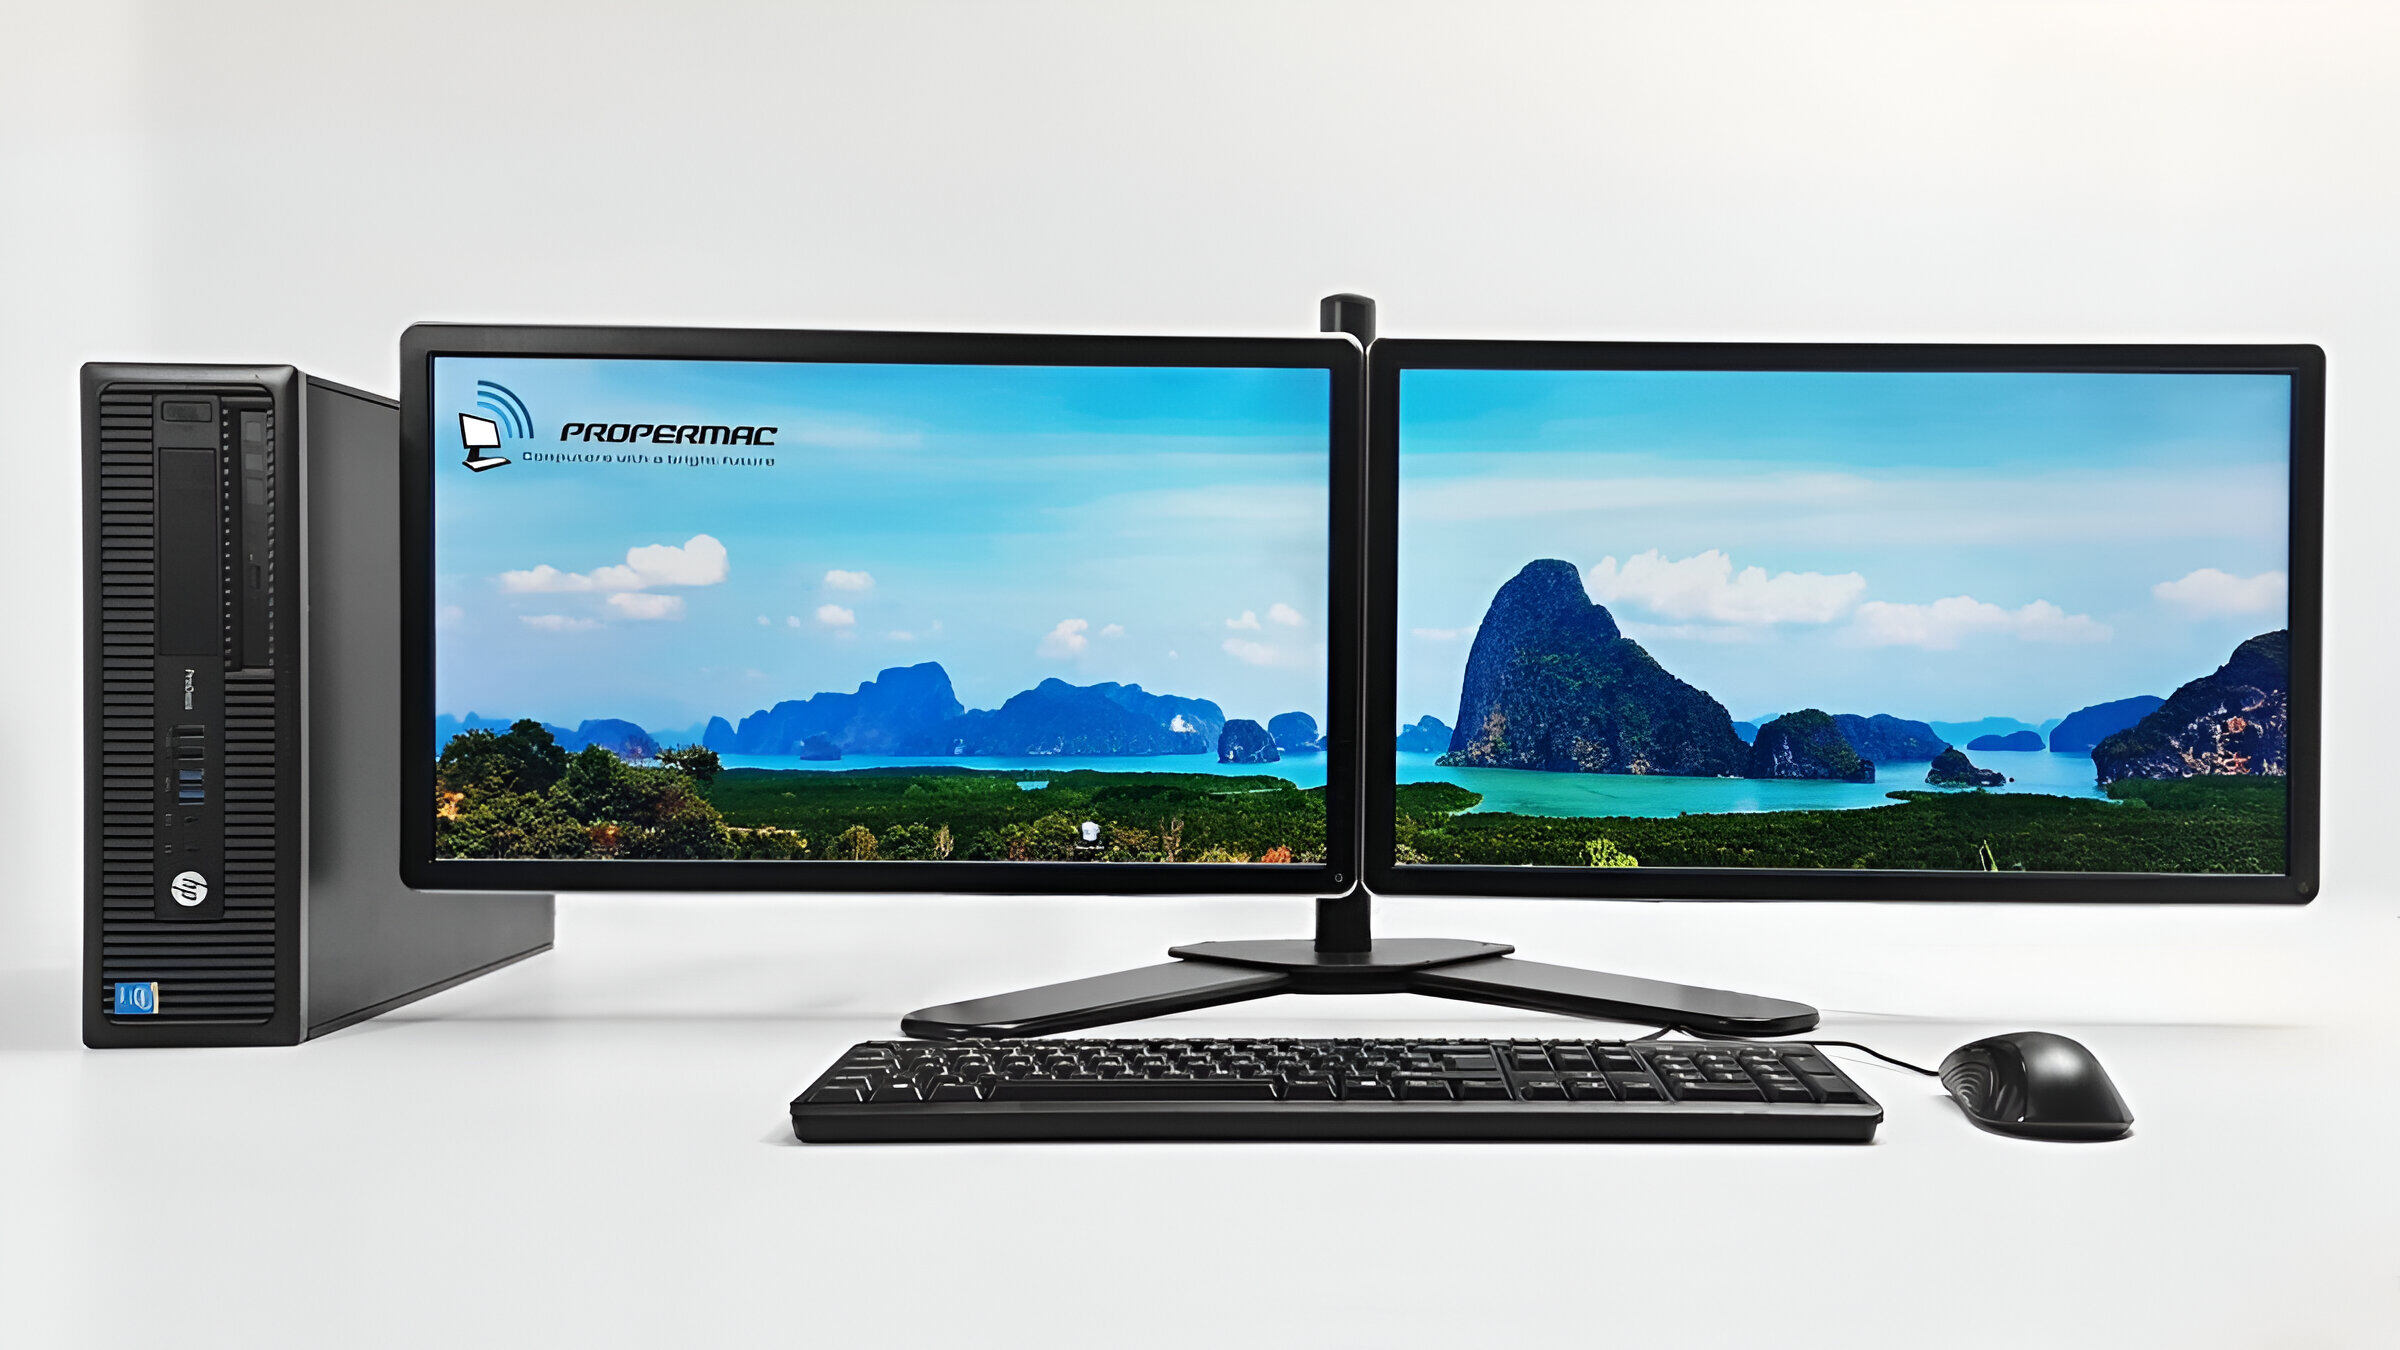 How To Add A Second Monitor To An All-In-One PC